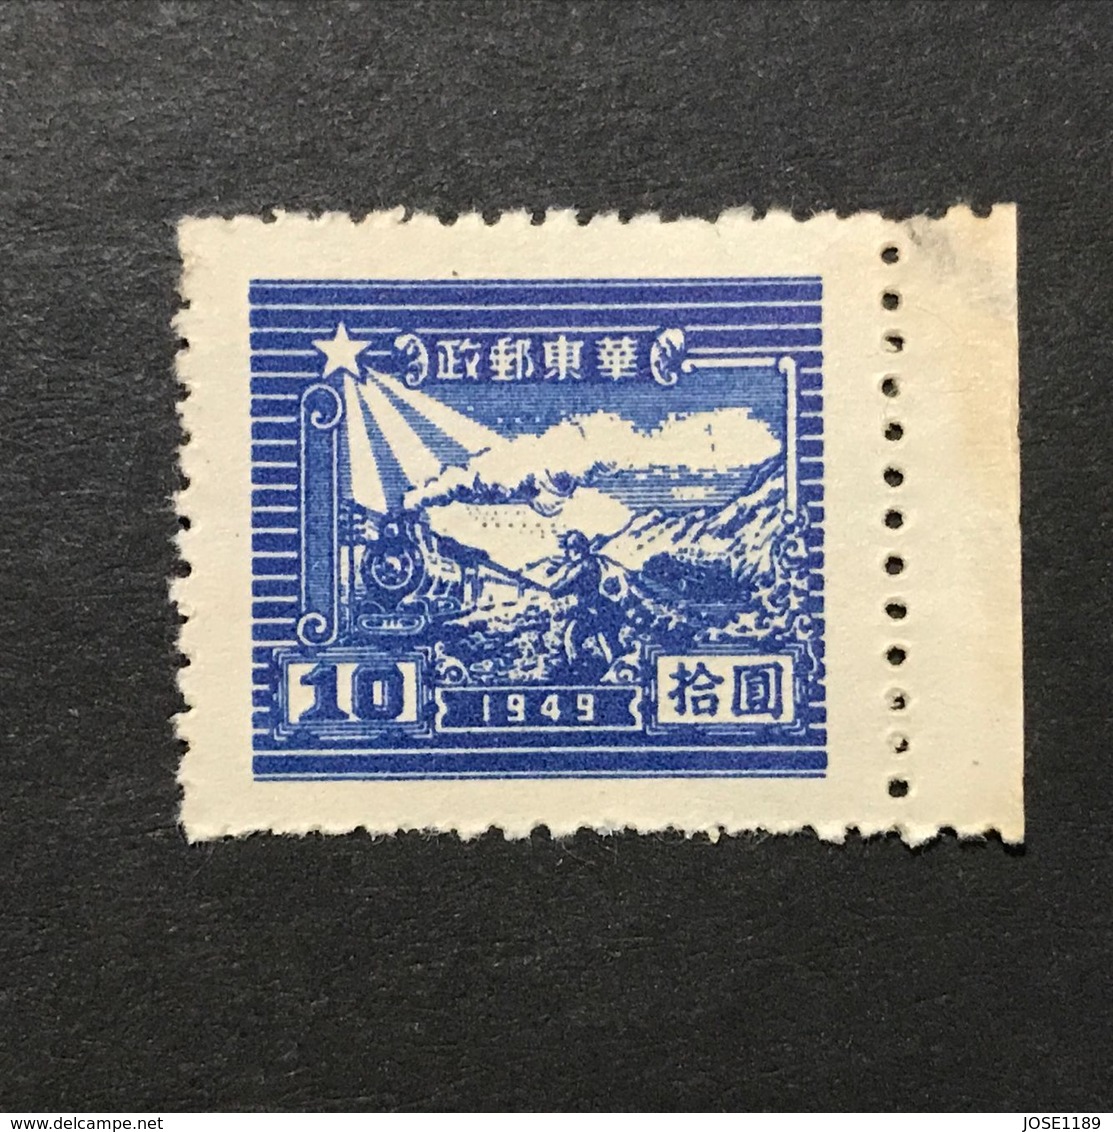 ◆◆◆CHINA 1949   2nd  Print Traffic Means Design Issue   $10   NEW  AA6479 - Cina Orientale 1949-50